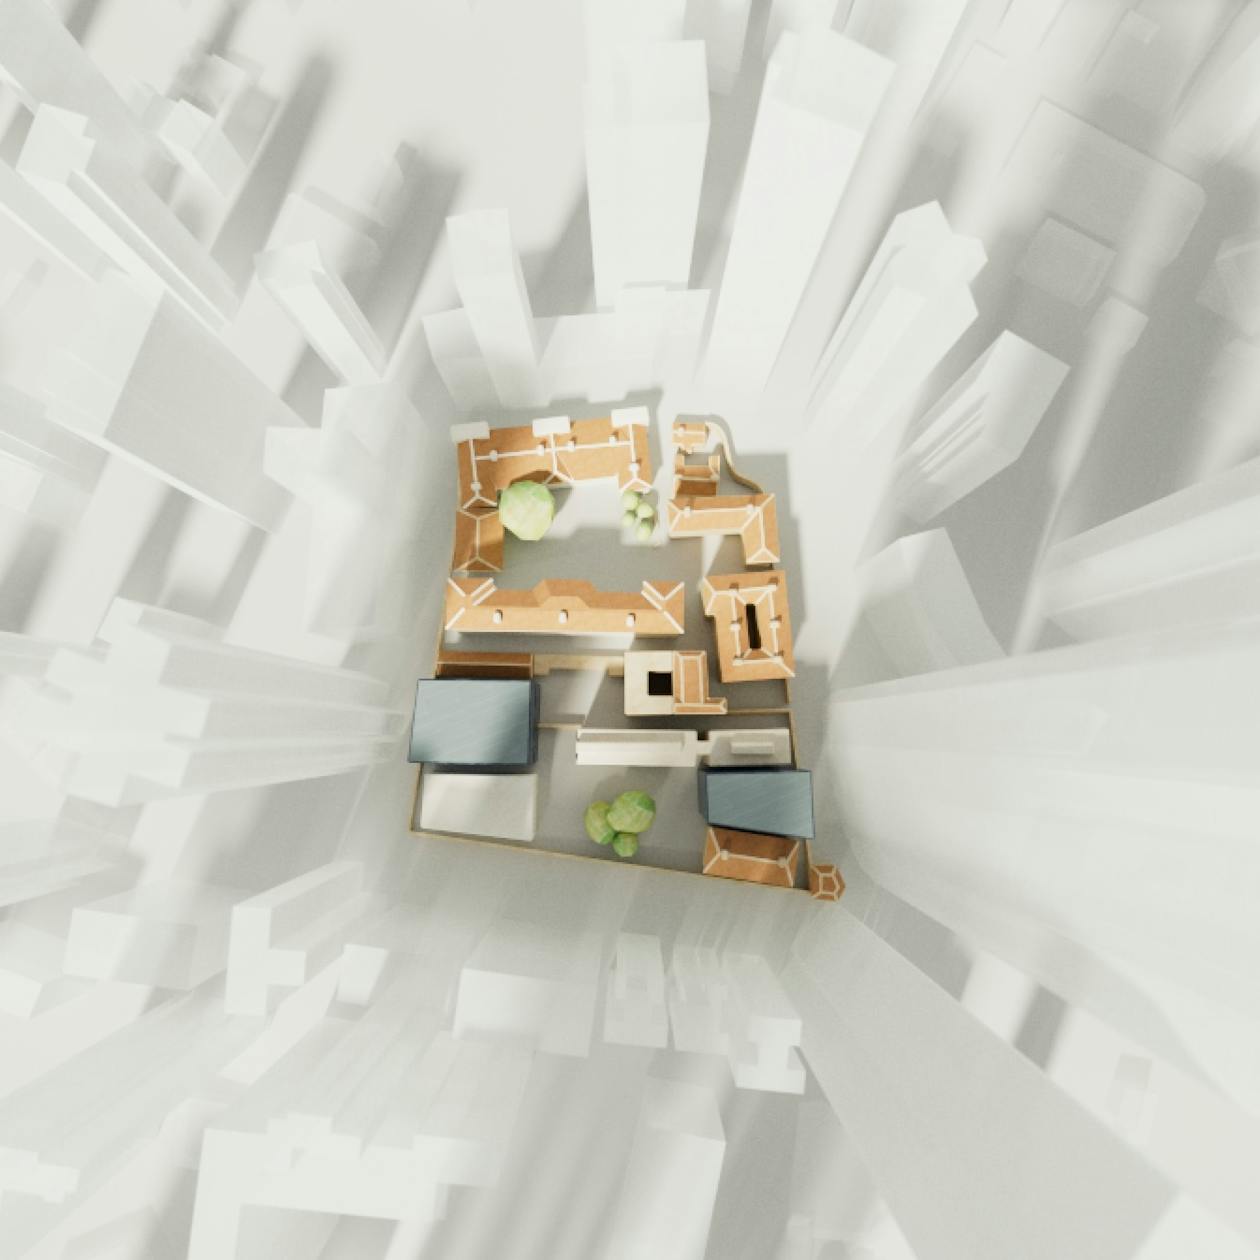 Birds-eye view of buildings in the pre-production render.